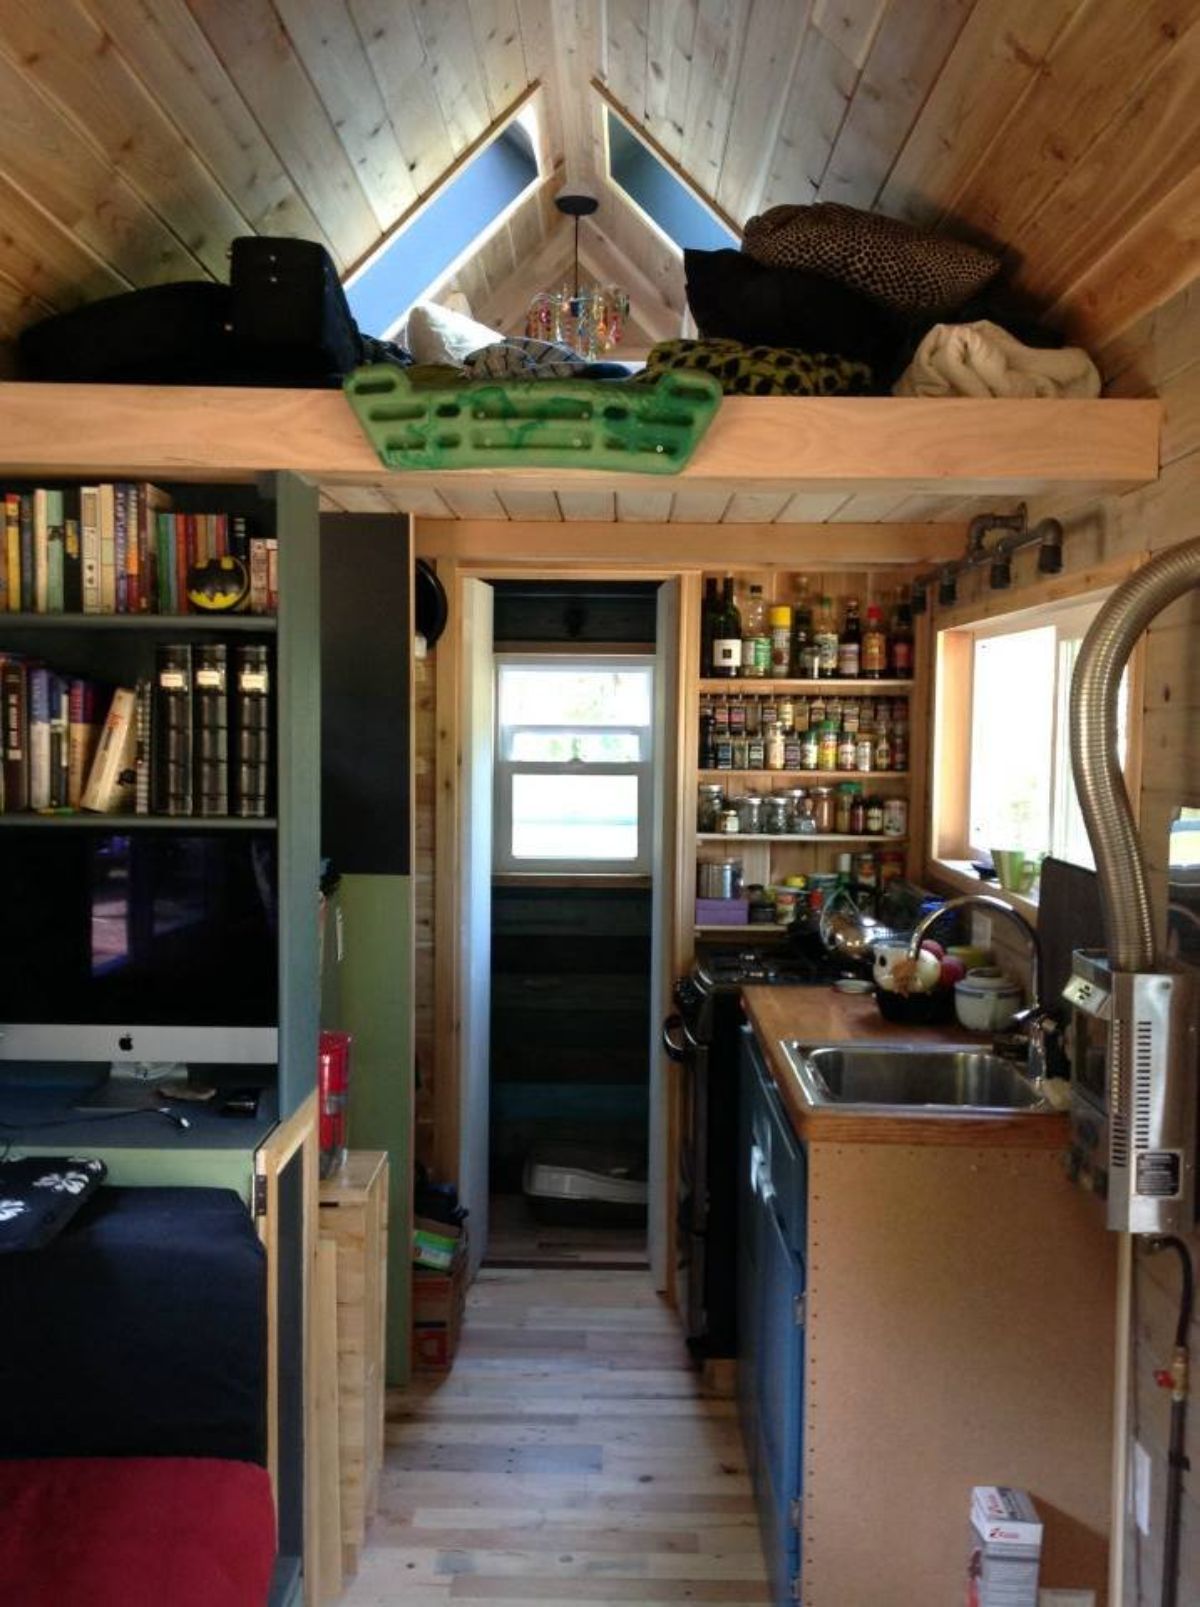 Huge pantry in kitchen area of 18' Tiny Home